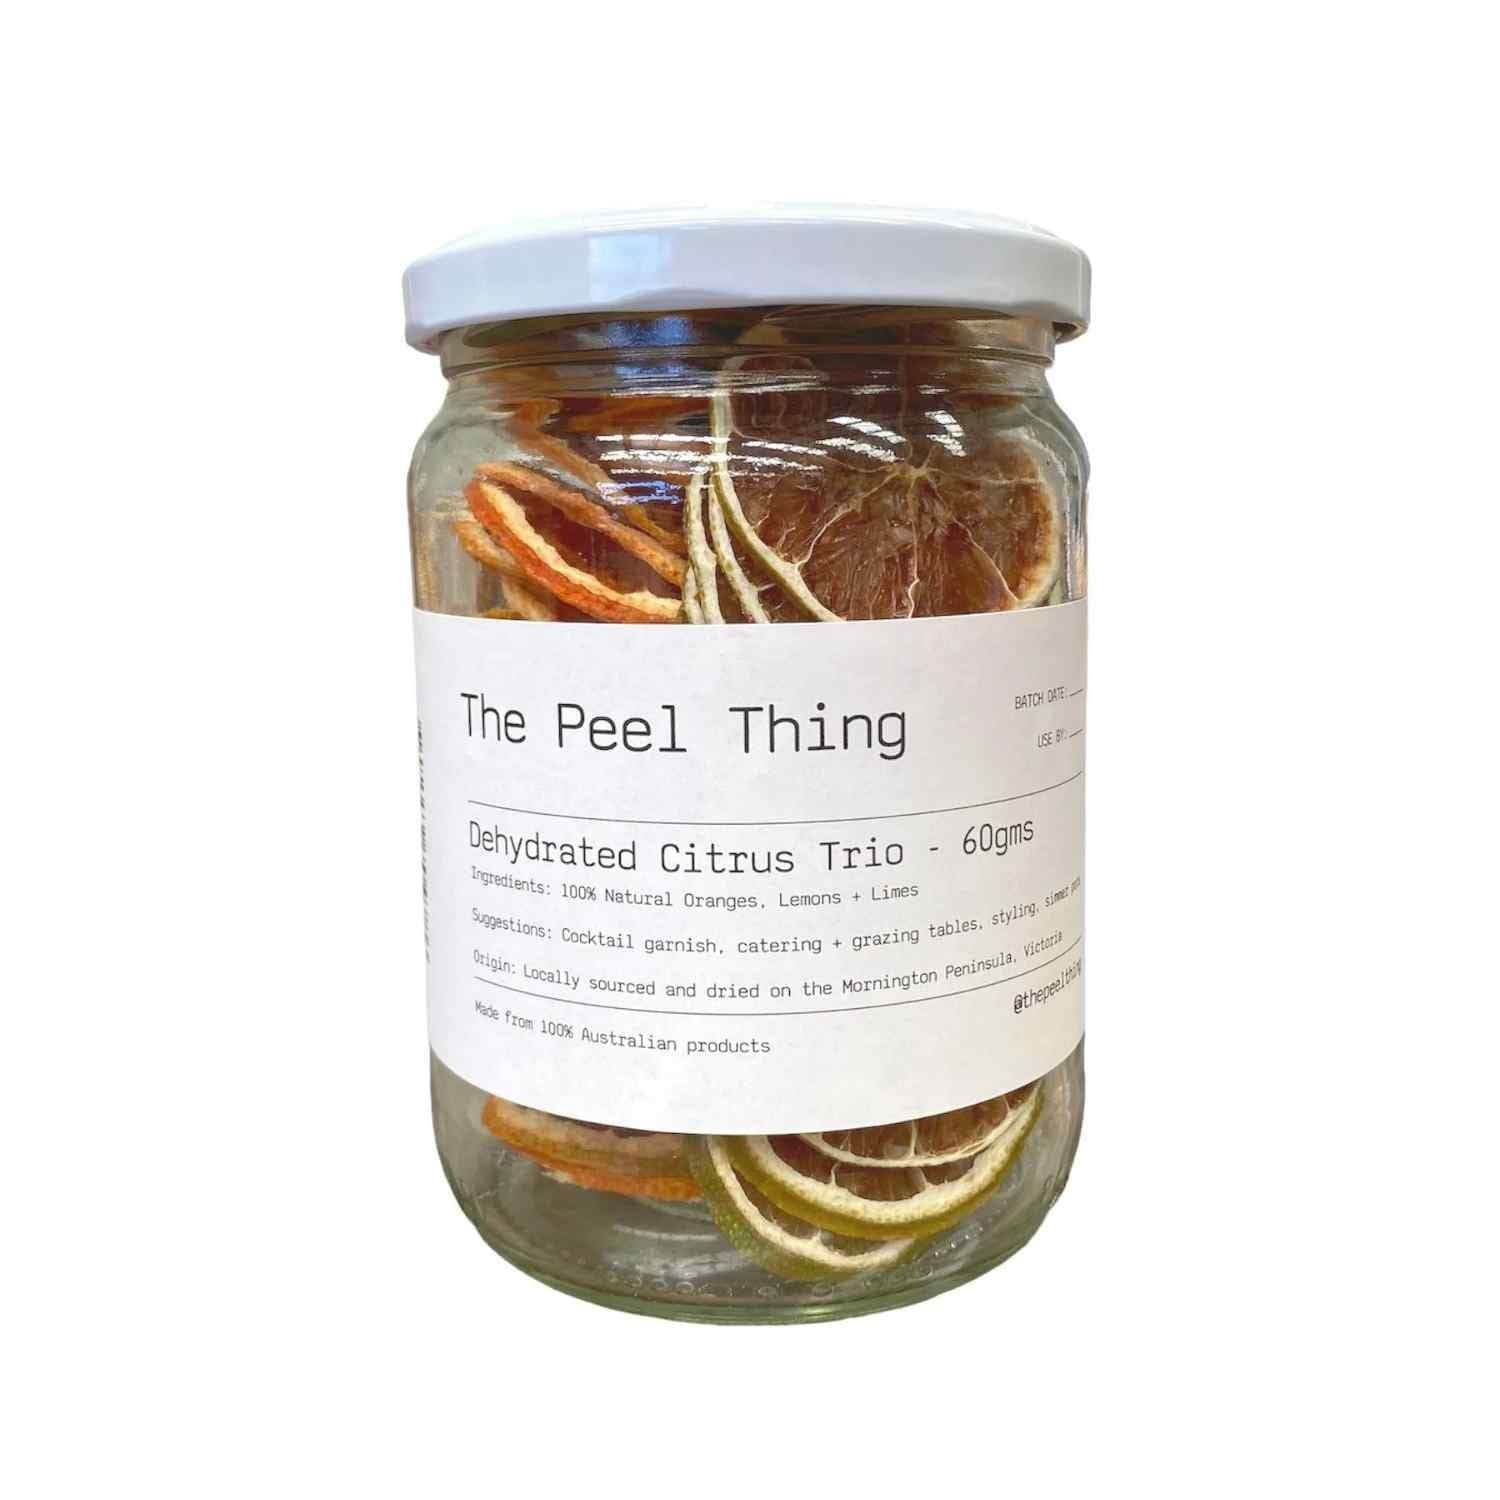 The Peel Thing Dehydrated Citrus Trio